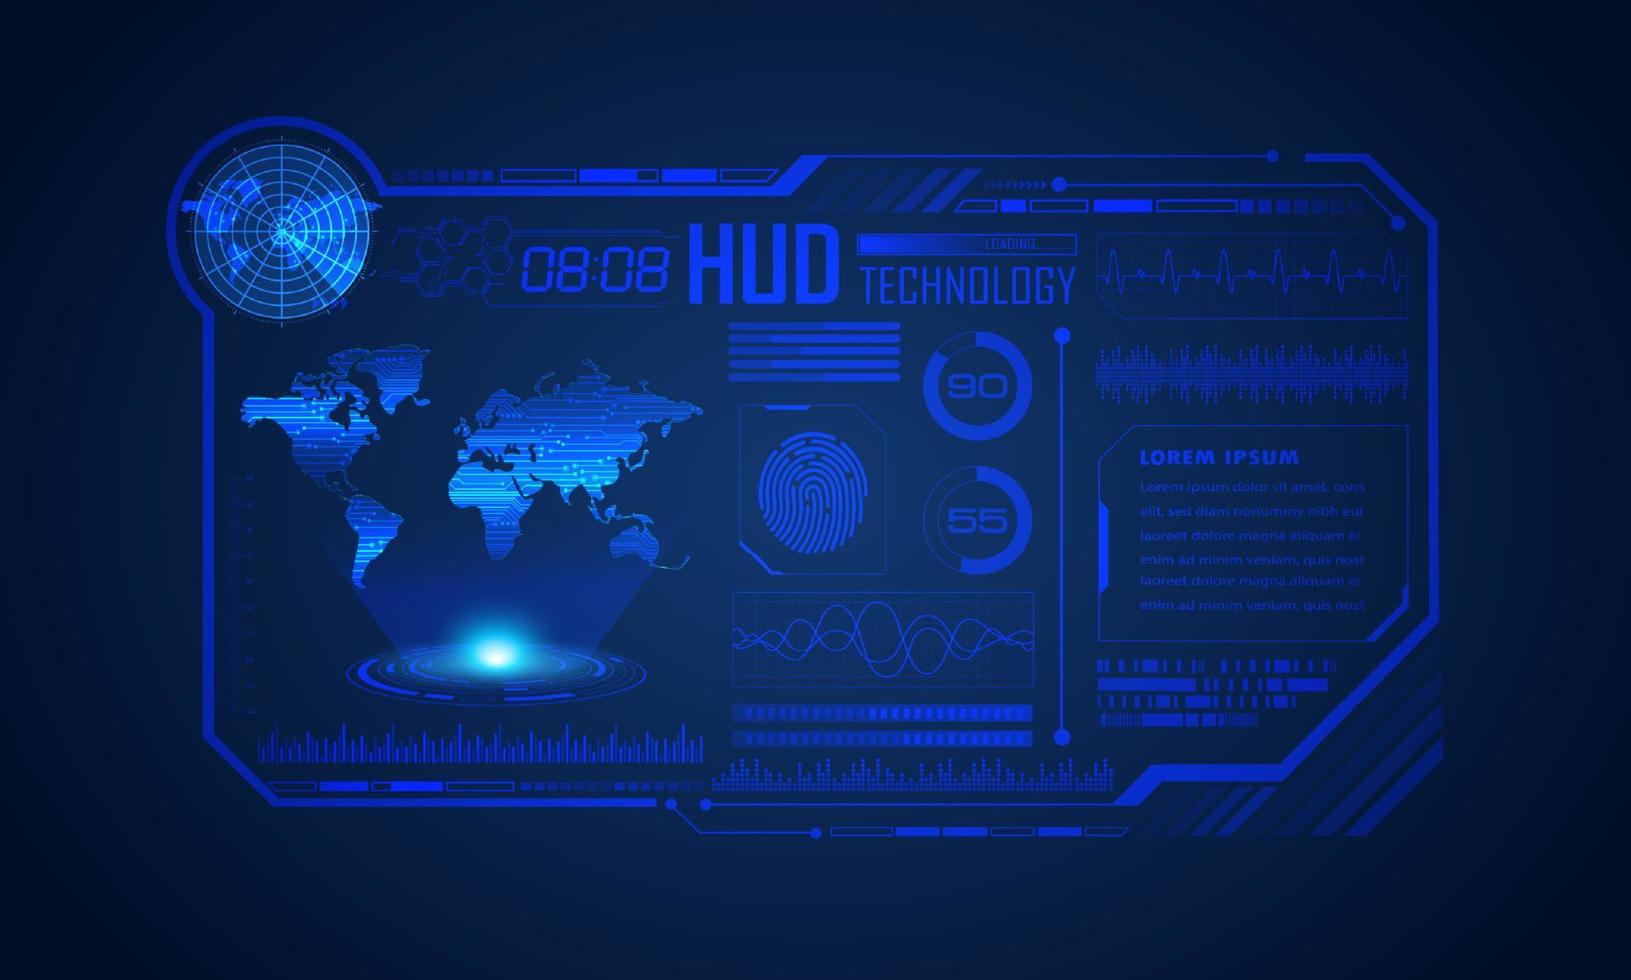 Modern HUD Technology Screen Background with Padlock vector